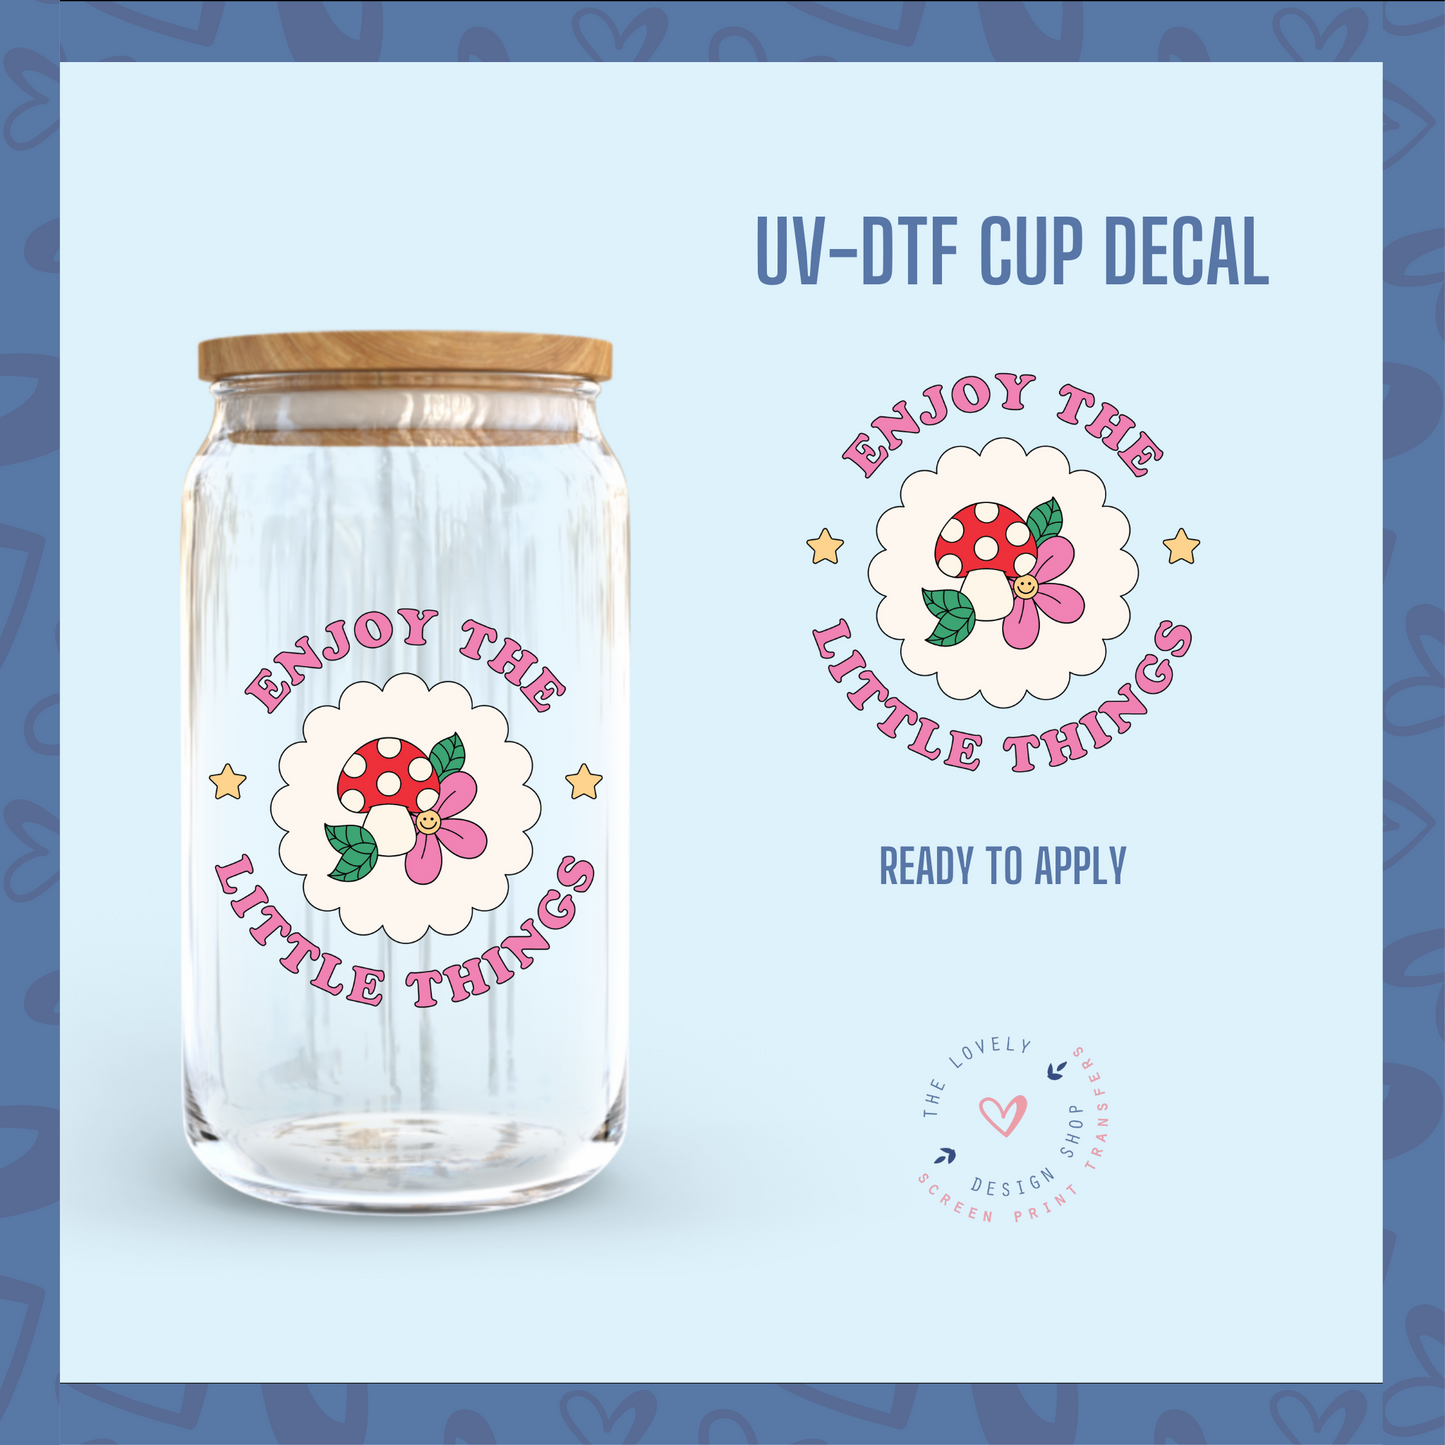 Enjoy The Little Things - UV DTF Cup Decal (Ready to Ship) Mar 4